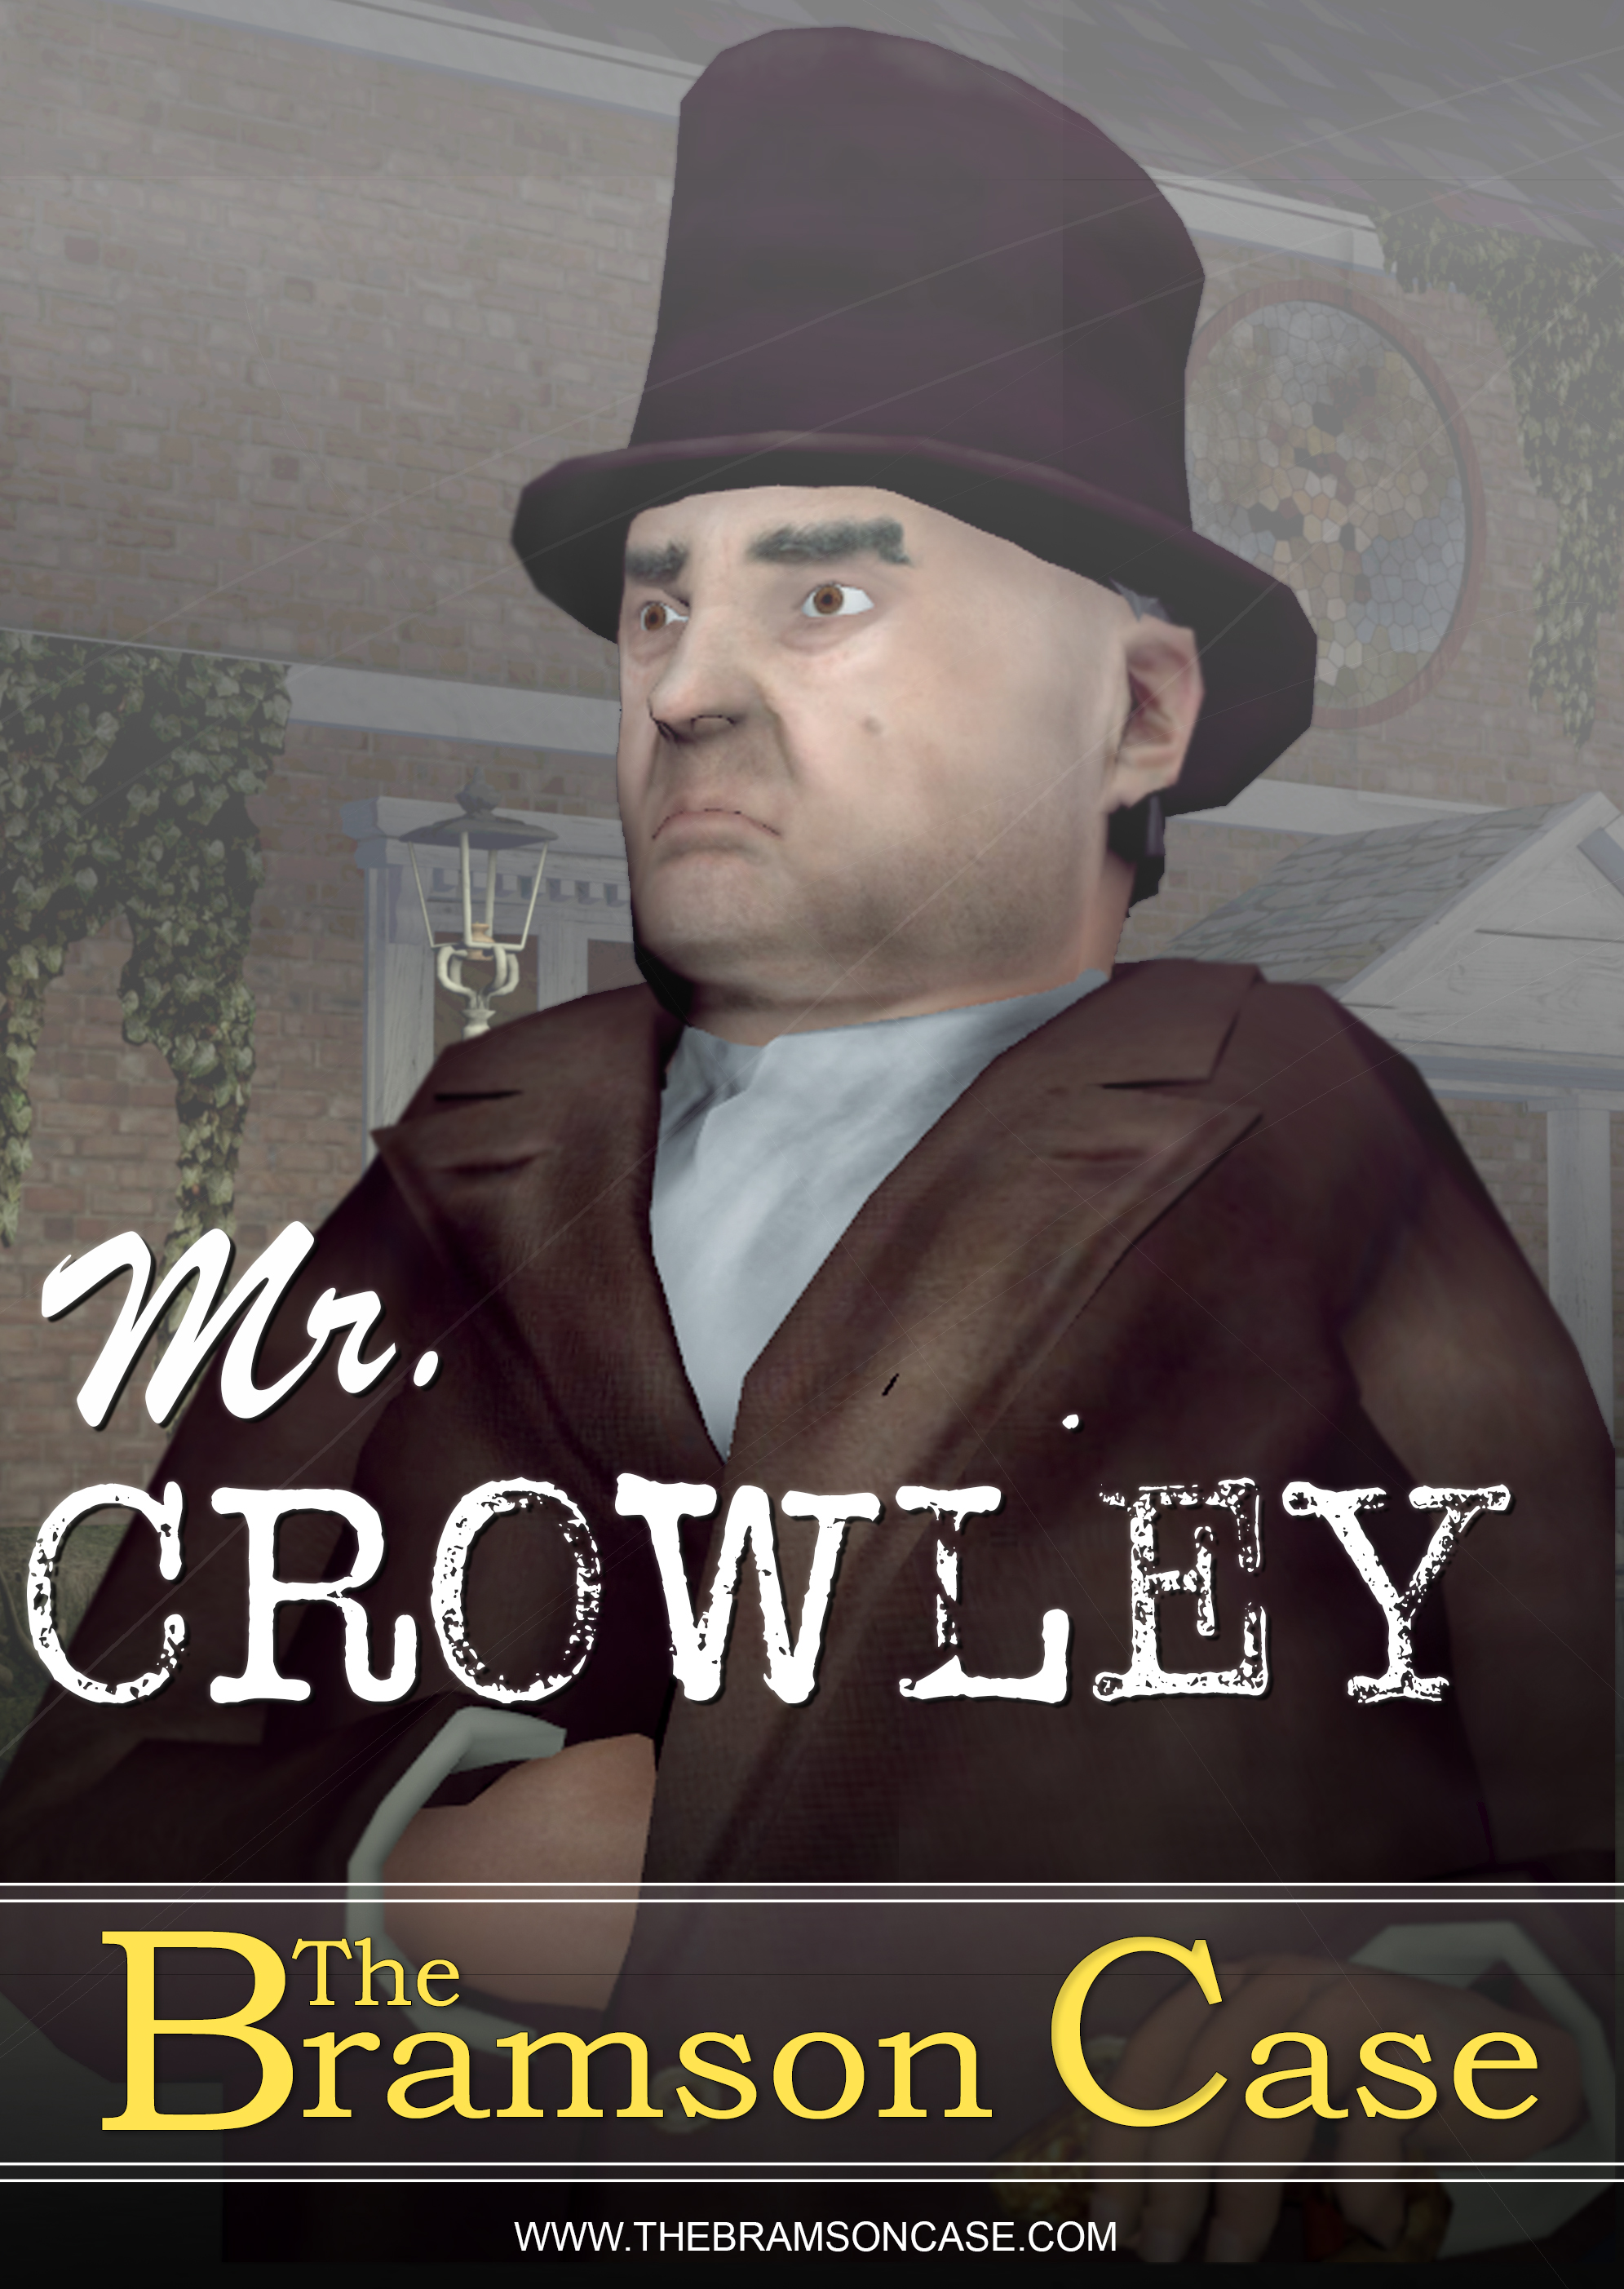 the bramson case, characters, cthulhu,lovecraft, Mr Crowley